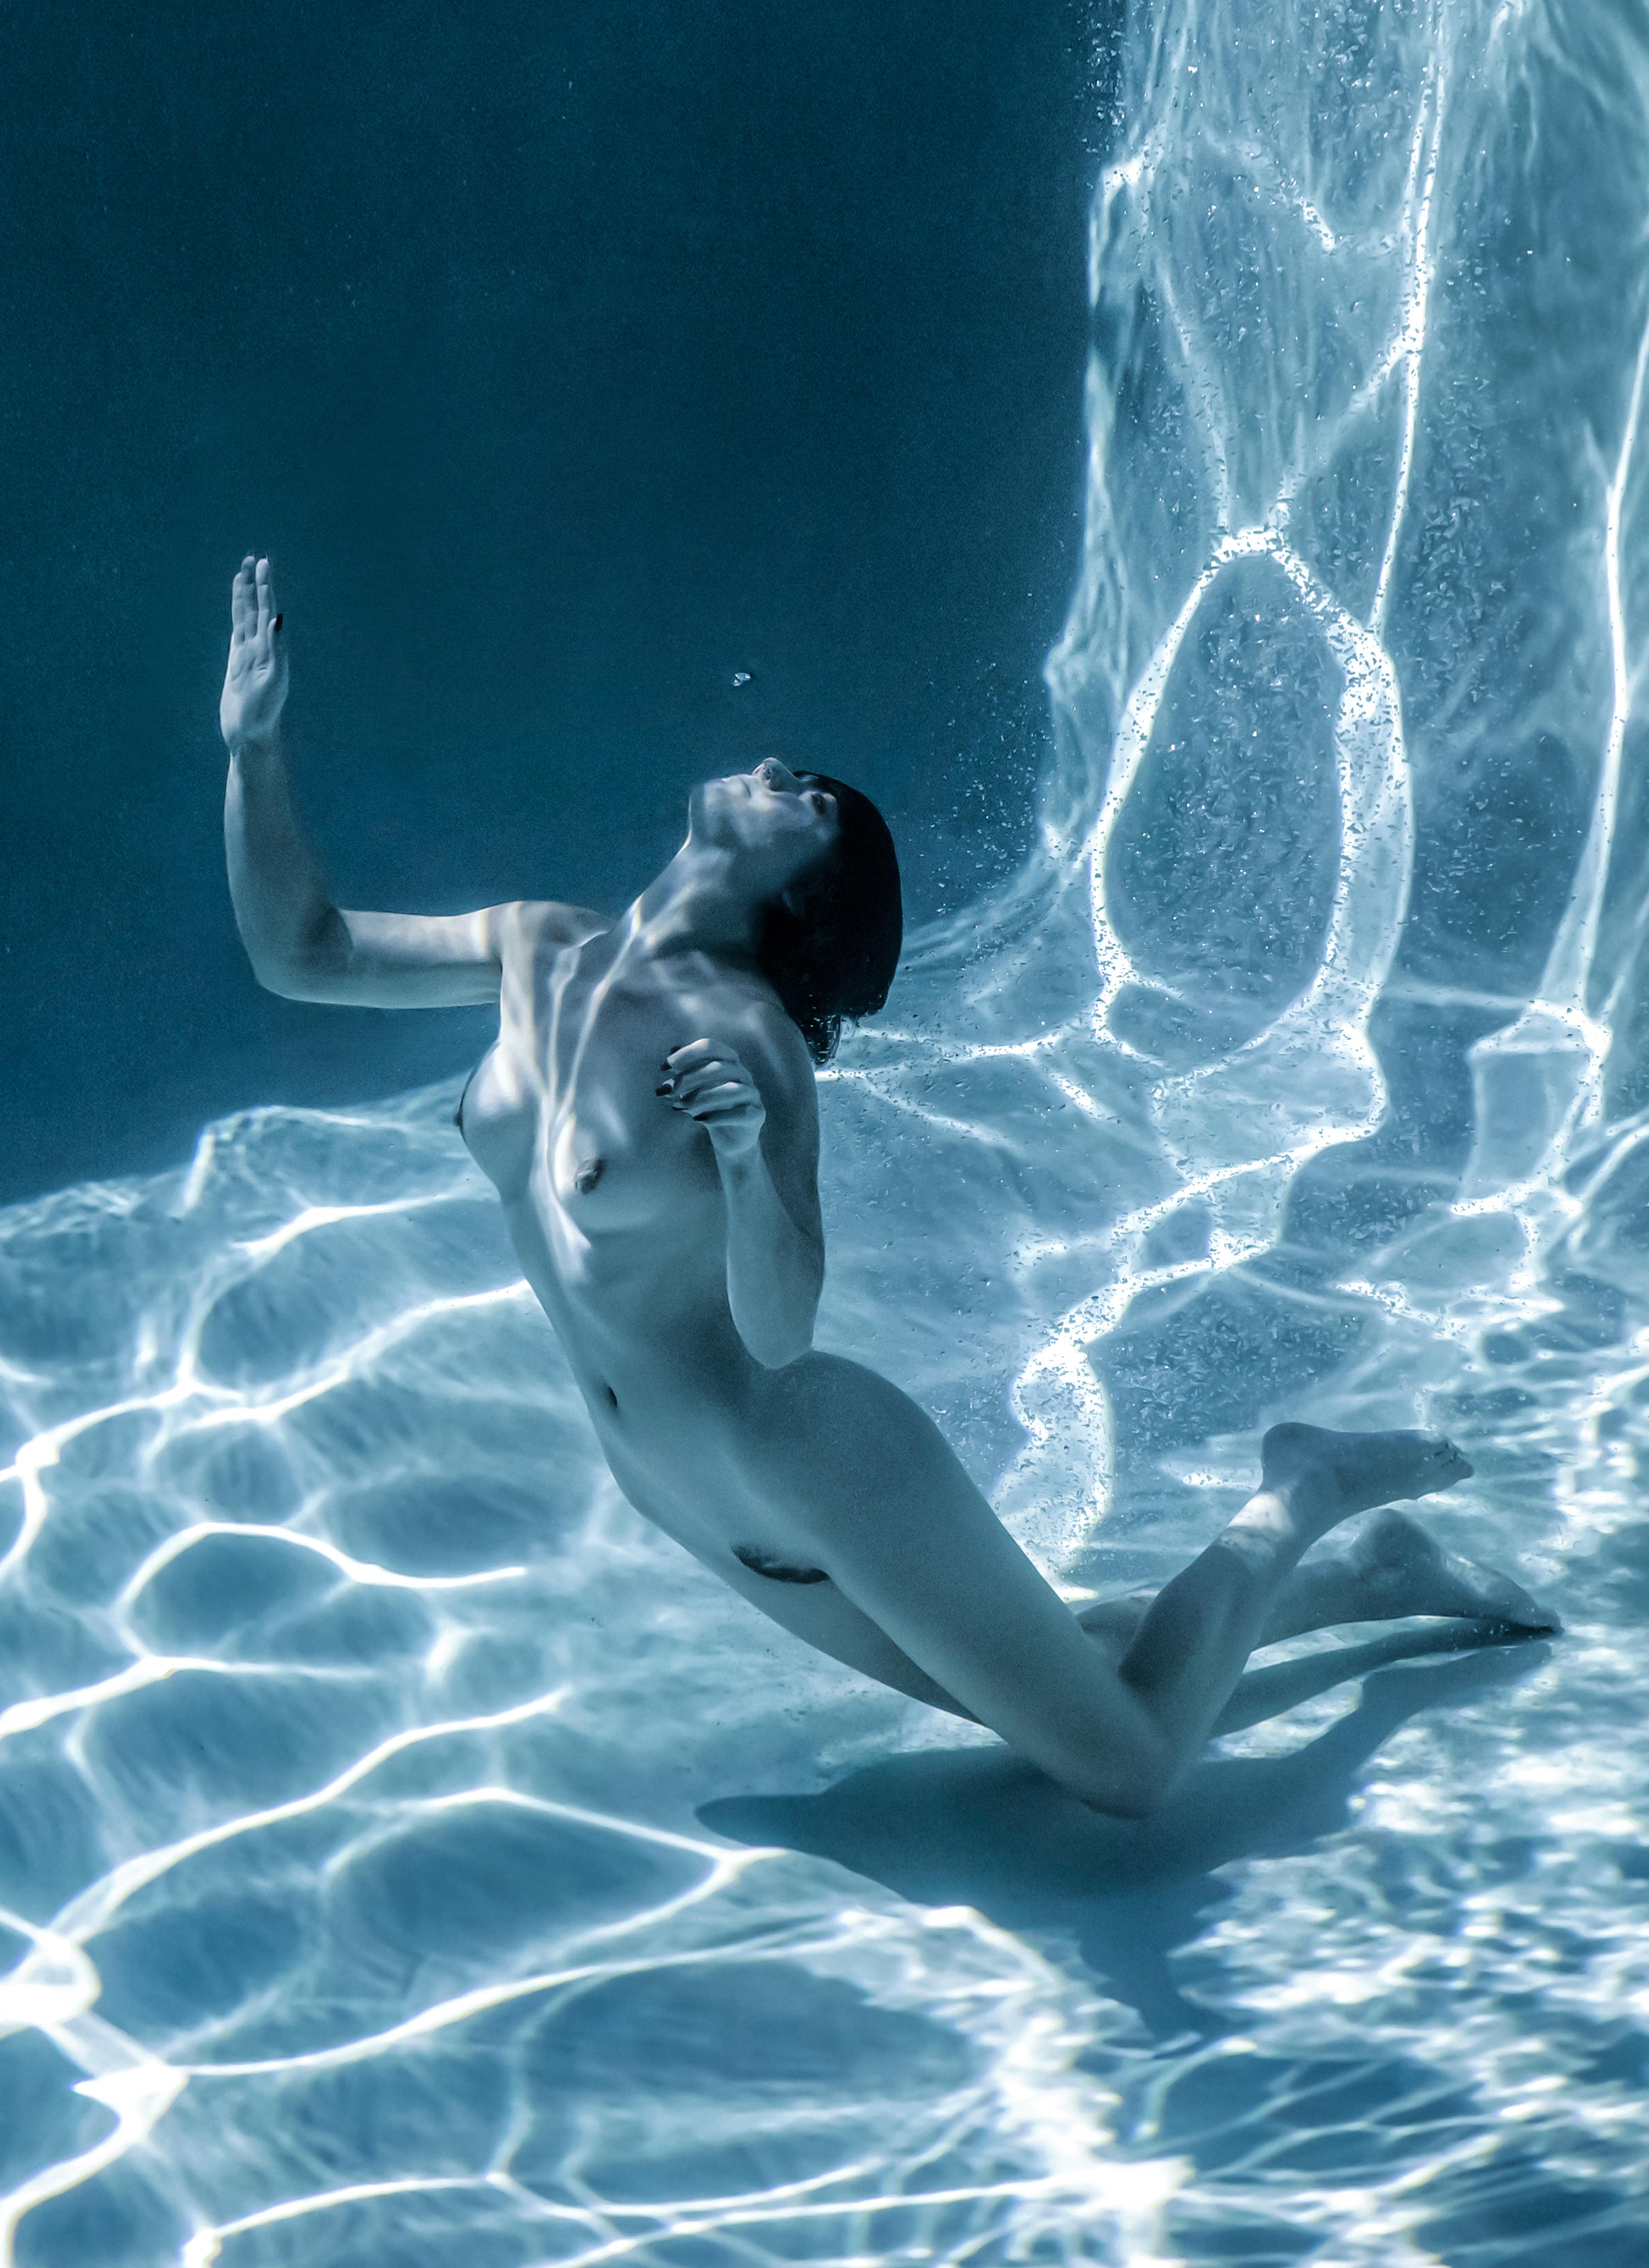 Marble Cave (blue triptych) - underwater nude photograph - 3 prints 35